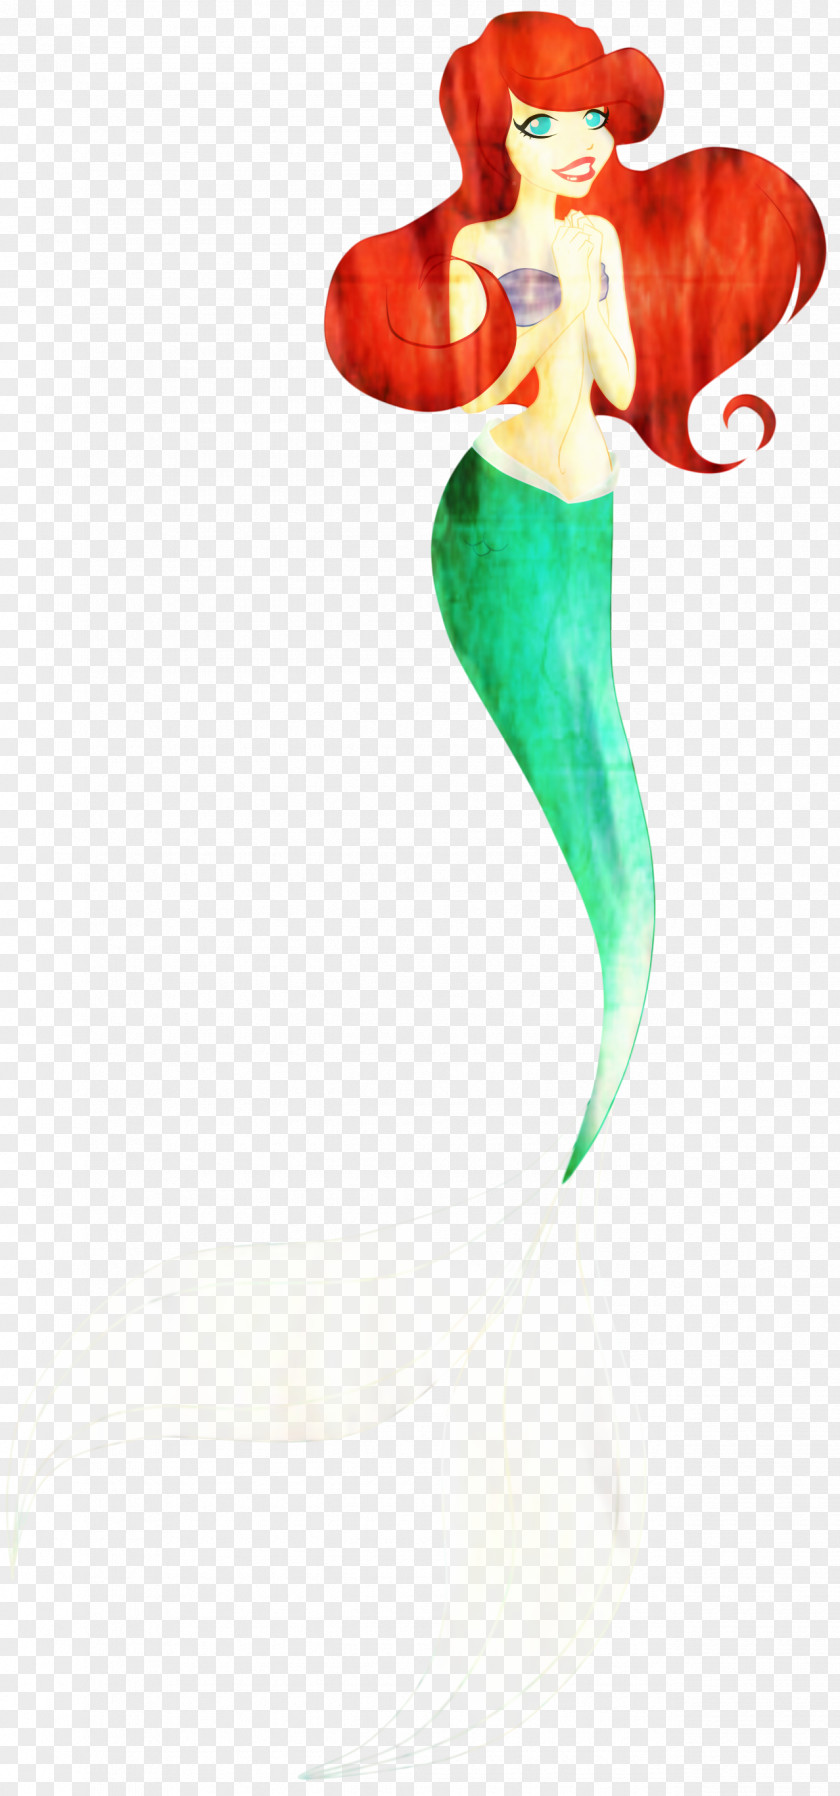 Nepenthes Plant Mermaid Cartoon PNG